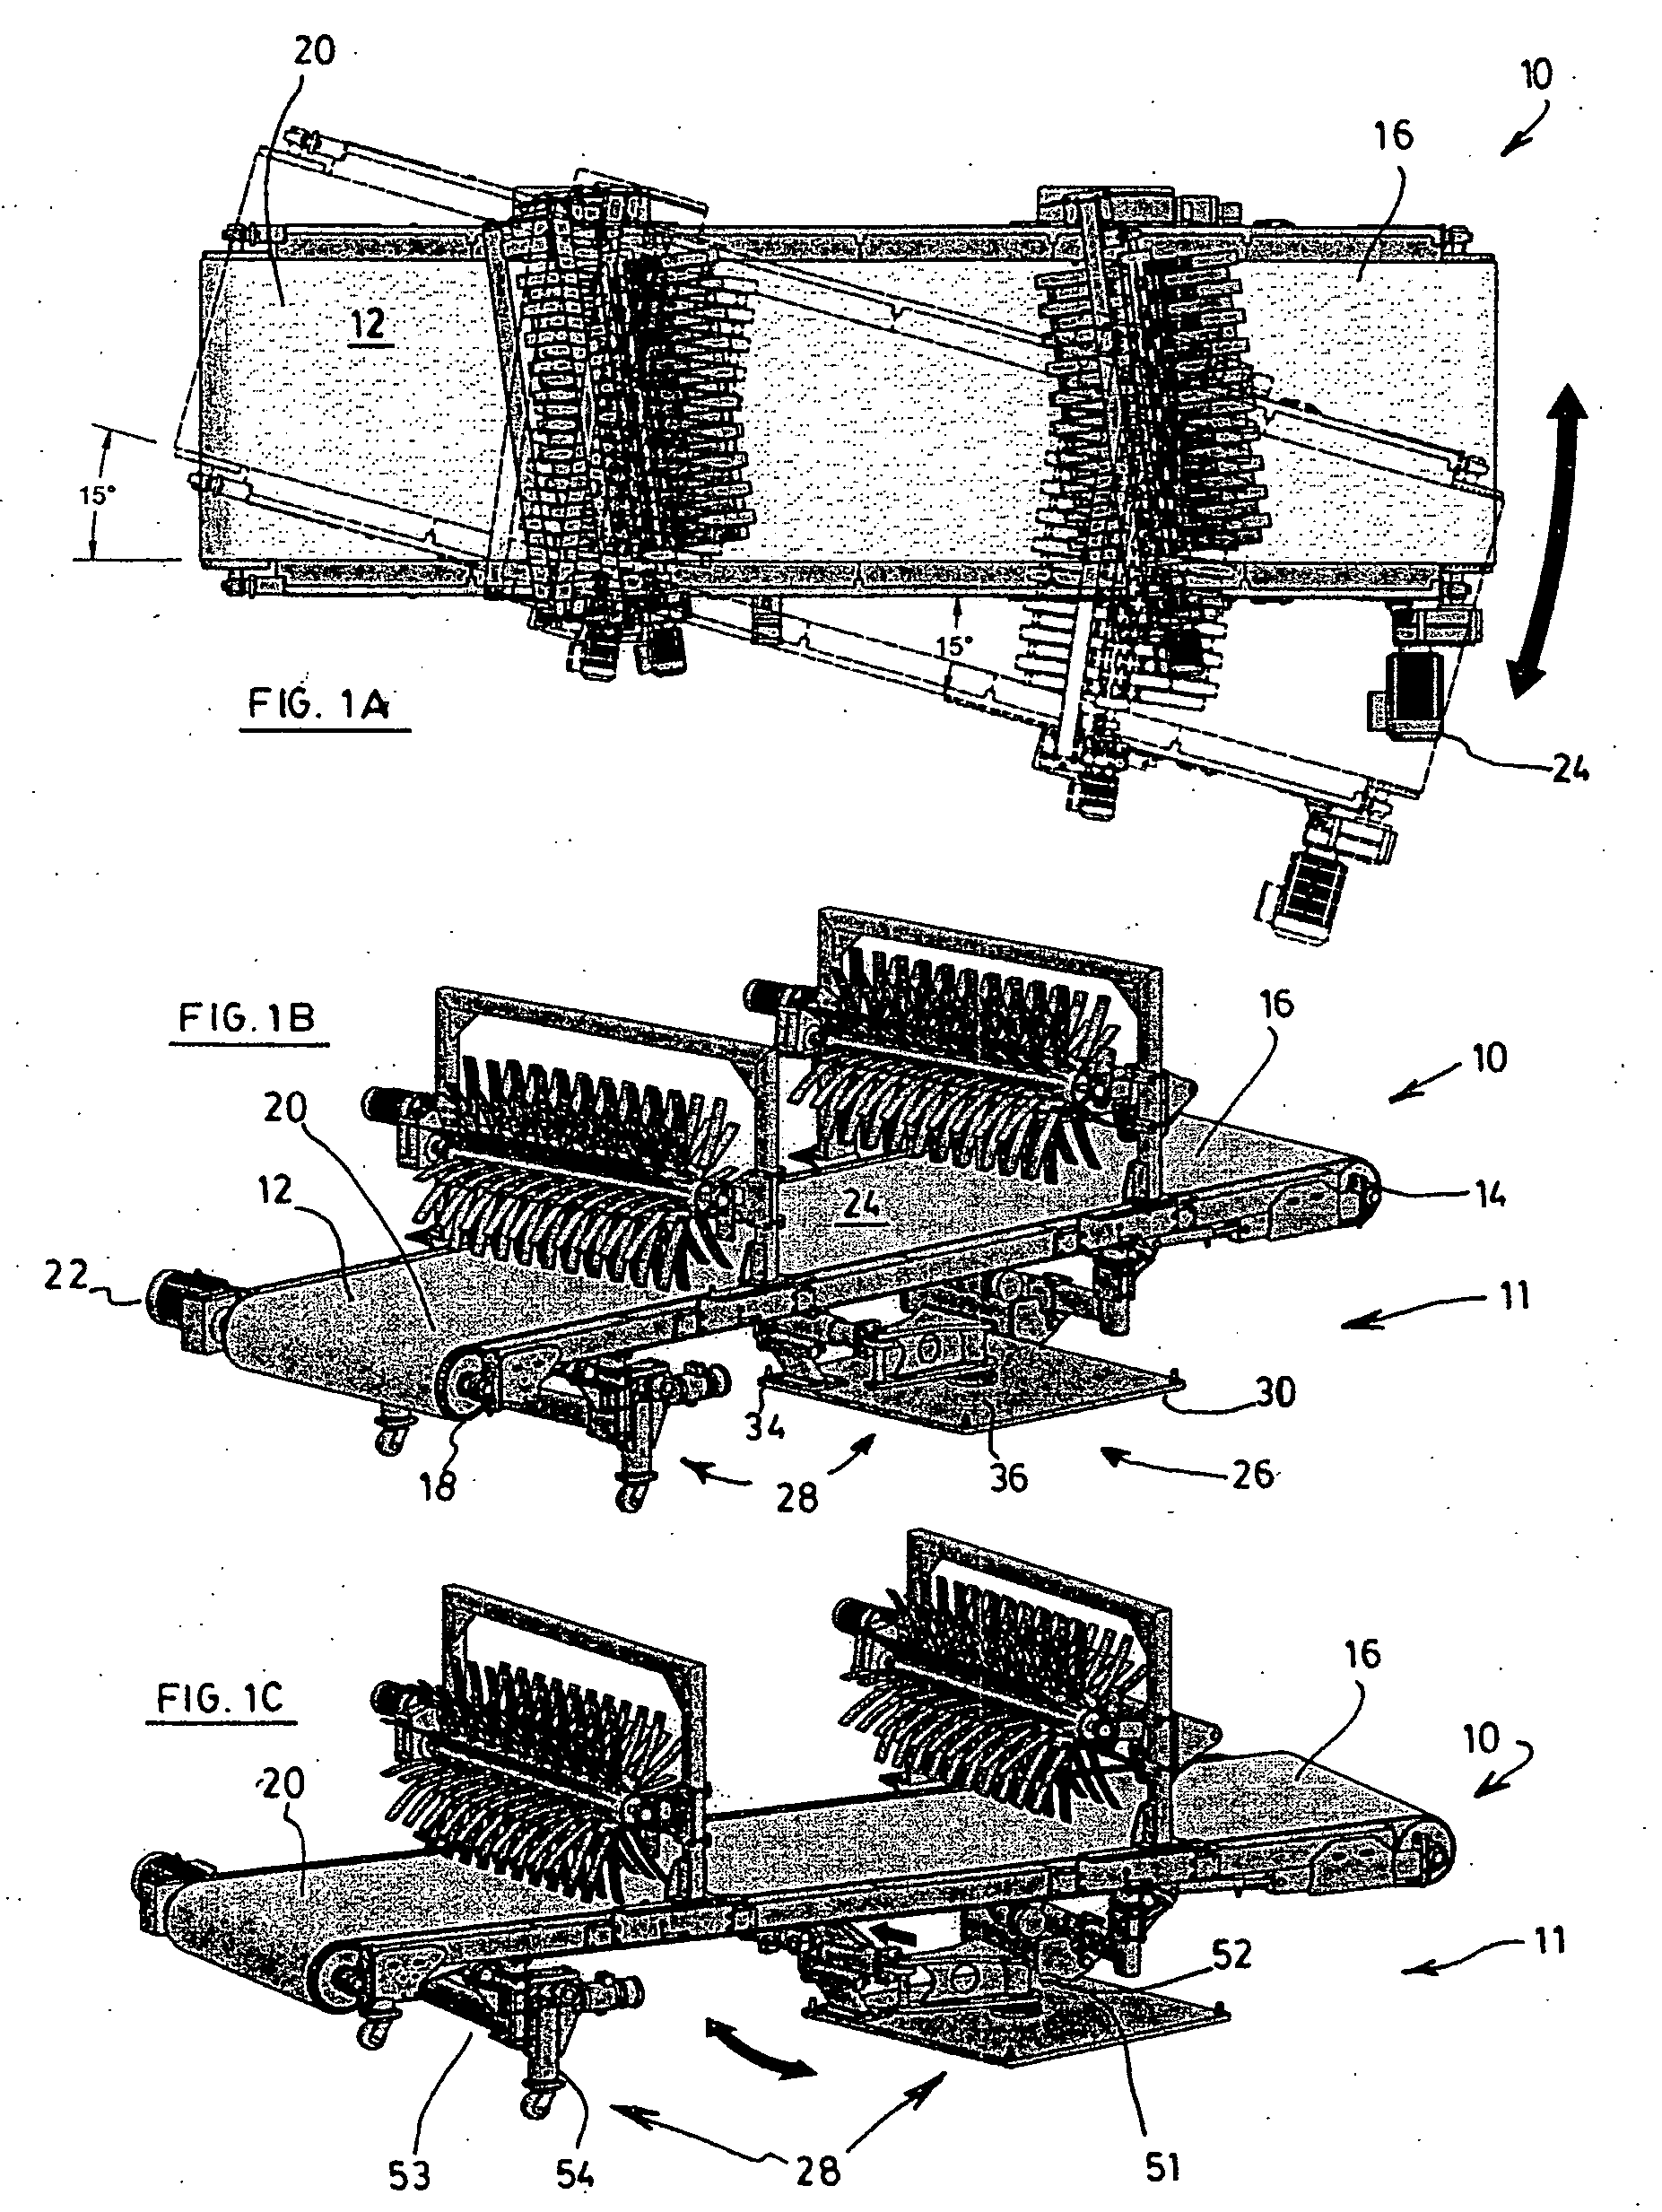 Adjustment system for a speed reduction belt assembly